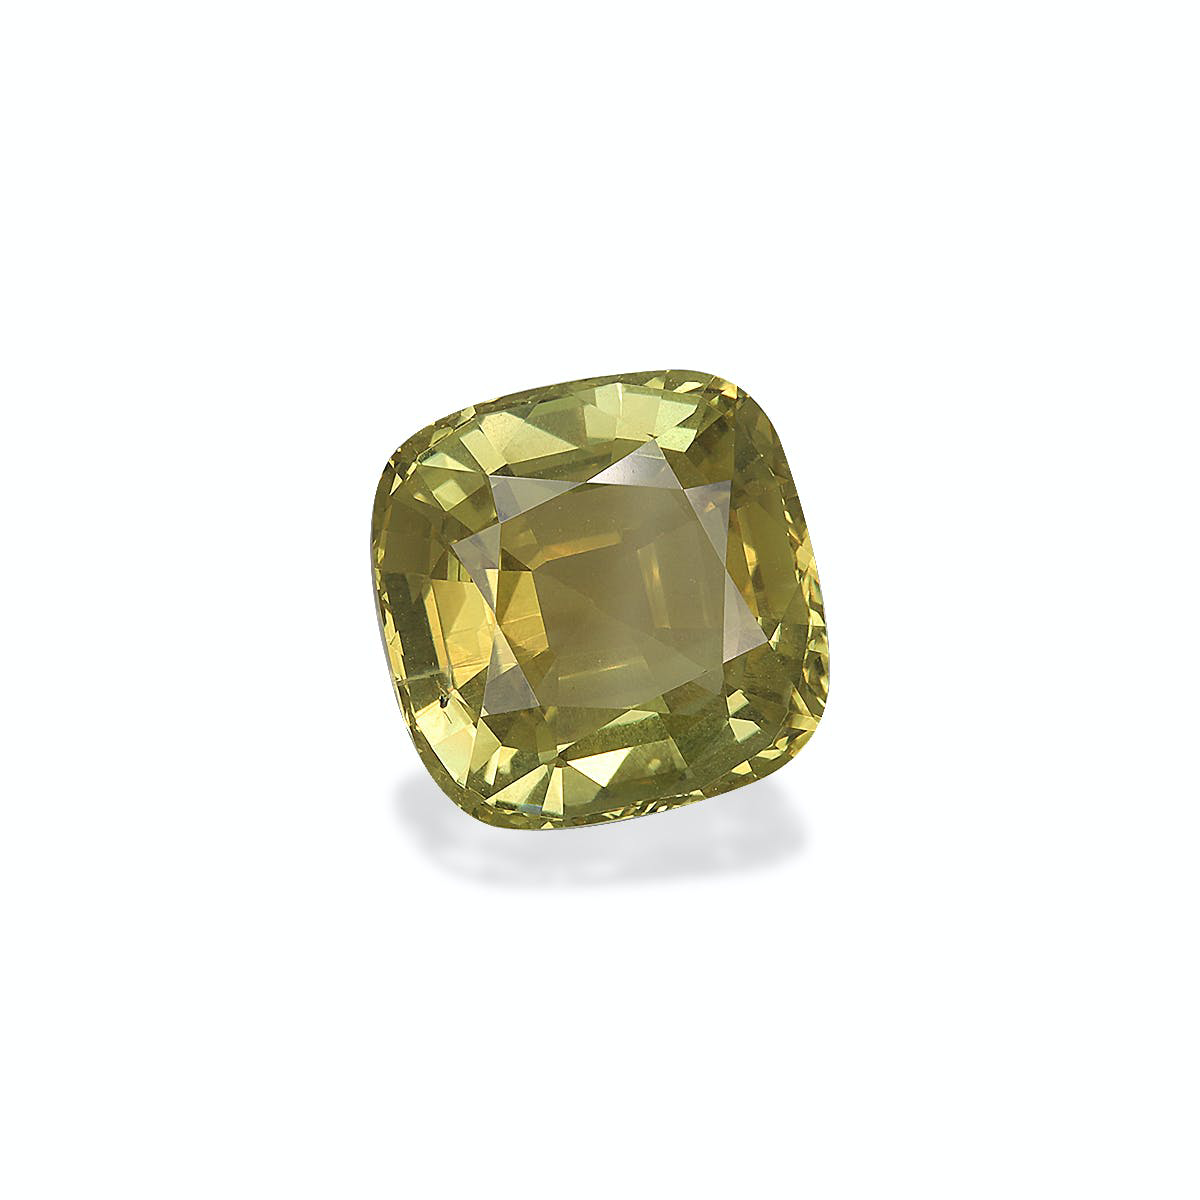 Picture of Color Change Olive Green Alexandrite 5.74ct - 10mm (AL0113)